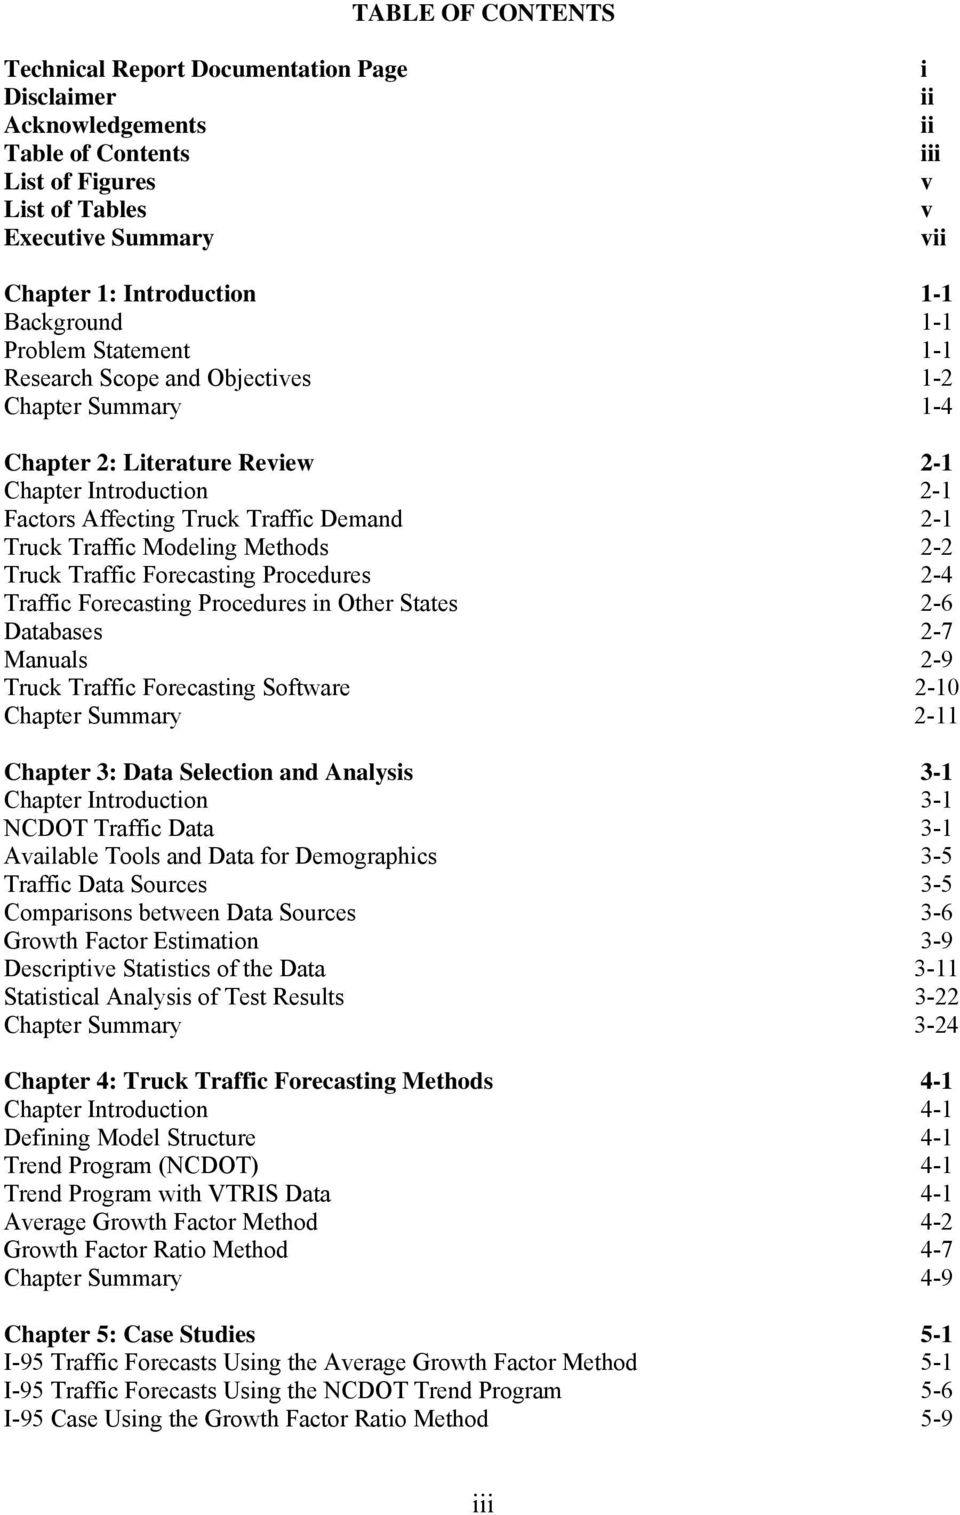 Traffic Modeling Methods 2-2 Truck Traffic Forecasting Procedures 2-4 Traffic Forecasting Procedures in Other States 2-6 Databases 2-7 Manuals 2-9 Truck Traffic Forecasting Software 2-10 Chapter